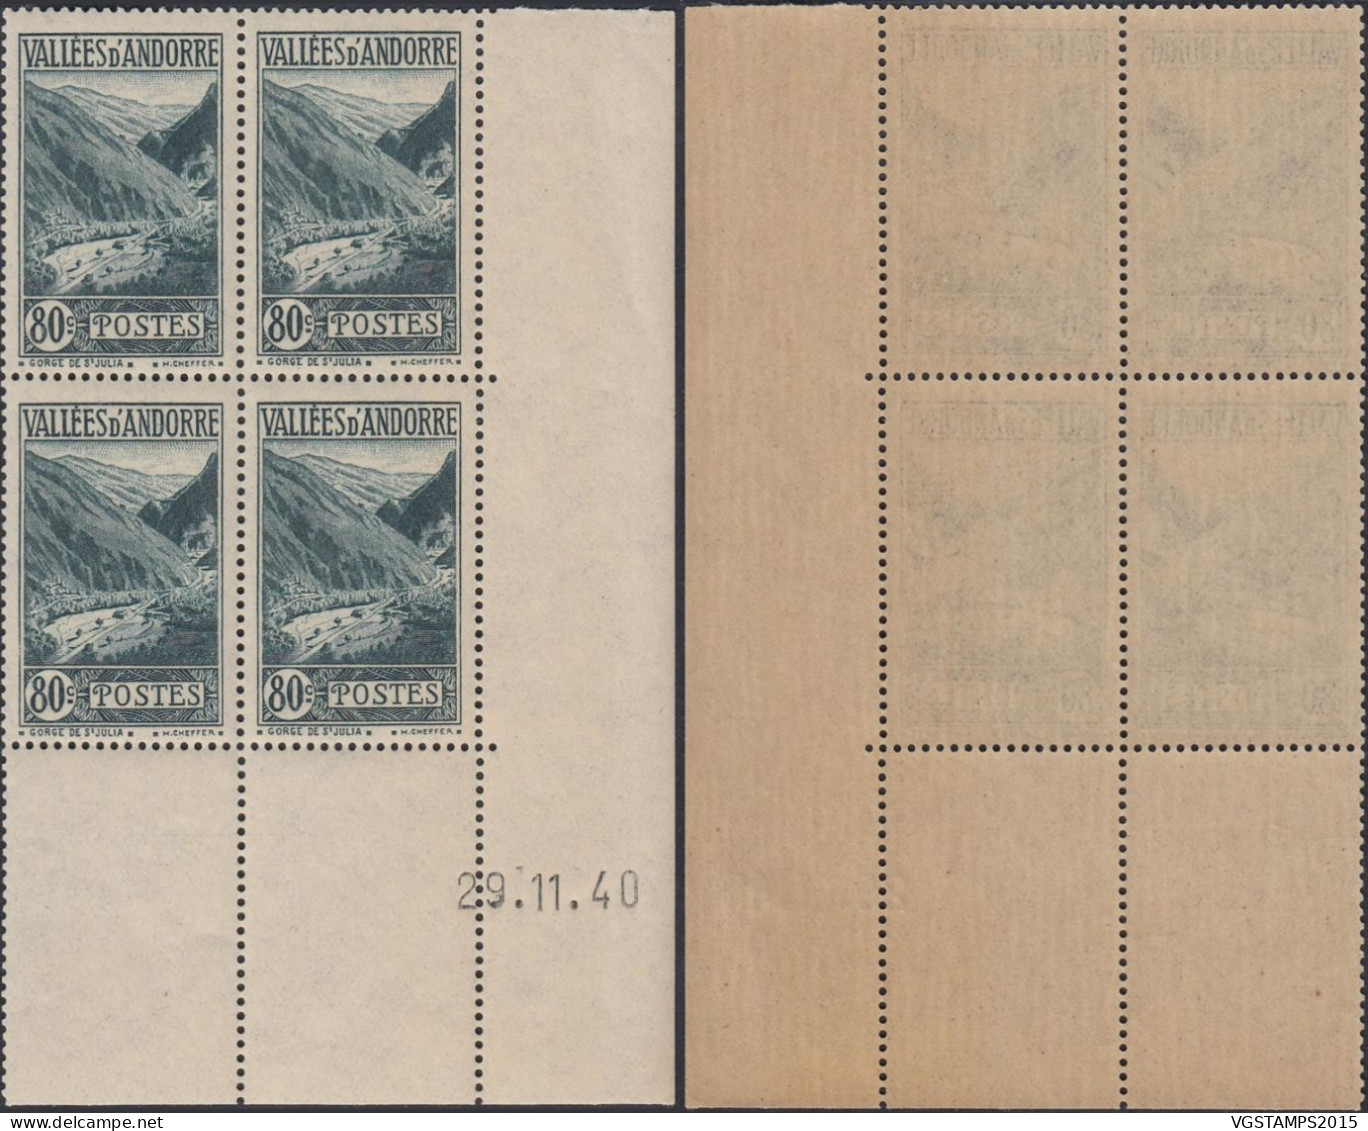 Andorre 1941 - Andorre Française - Timbres Neufs. Yvert Nr.: 72. Michel Nr.: 77. Coin Daté: 29/11/40.... (EB) AR-02068 - Unused Stamps